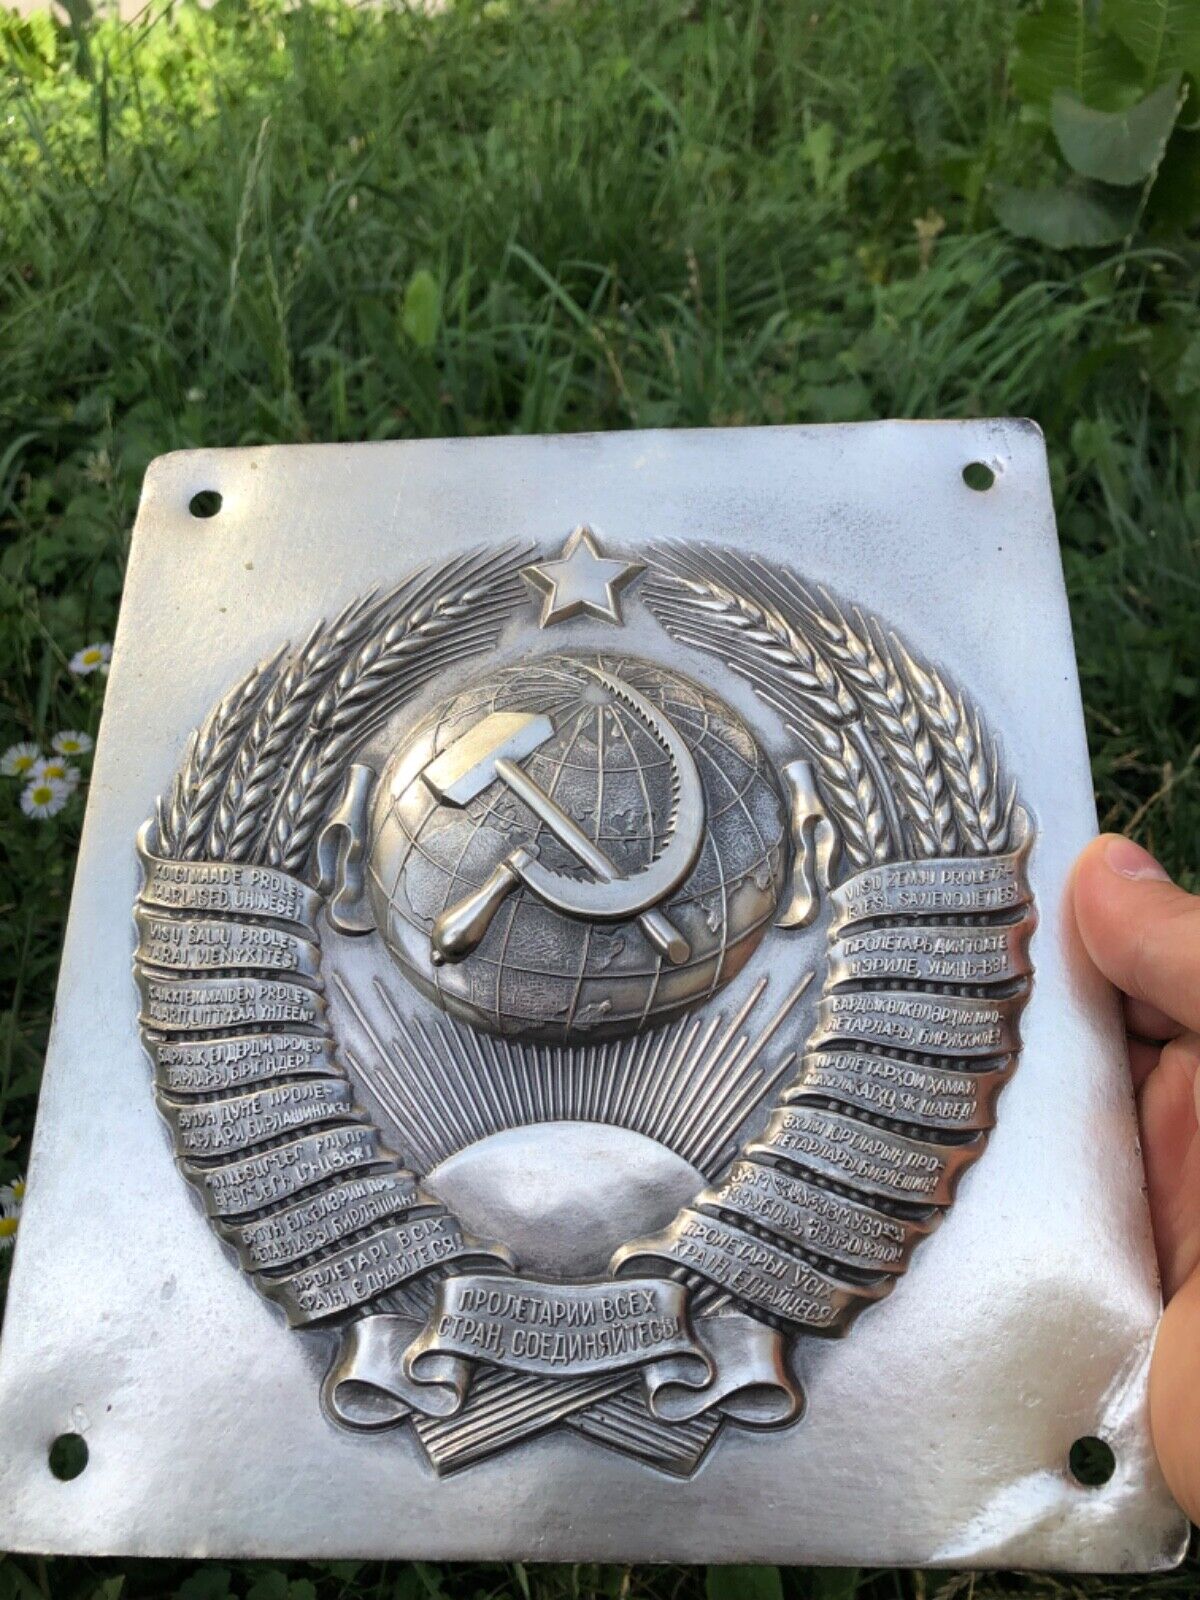 Original USSR Coat of Arms. 16 republics Removed from the boarder pole.